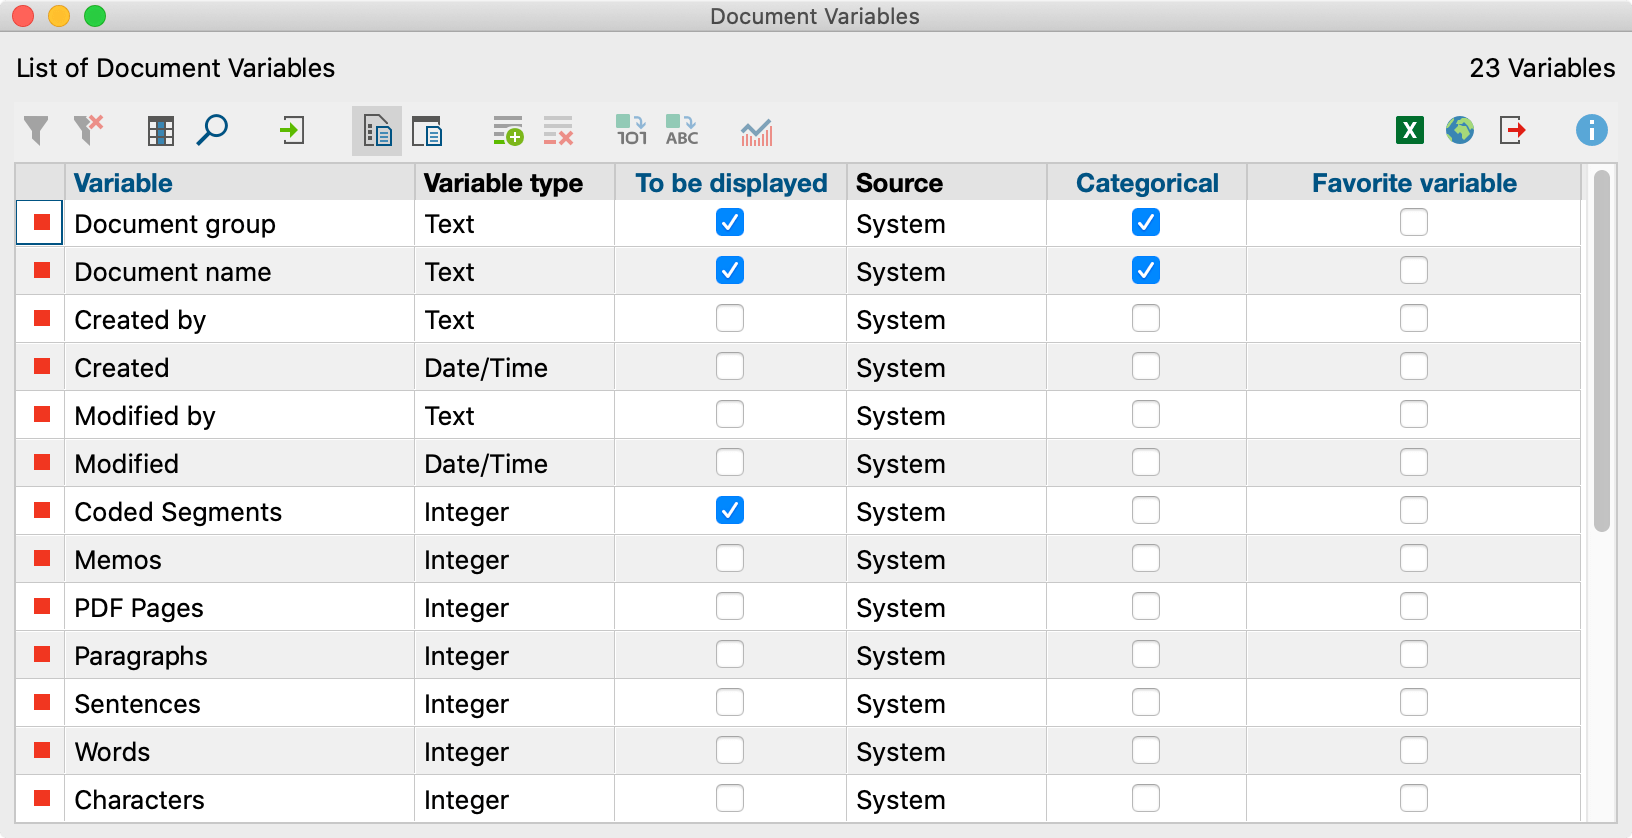 System Variables in the “List of document variables”